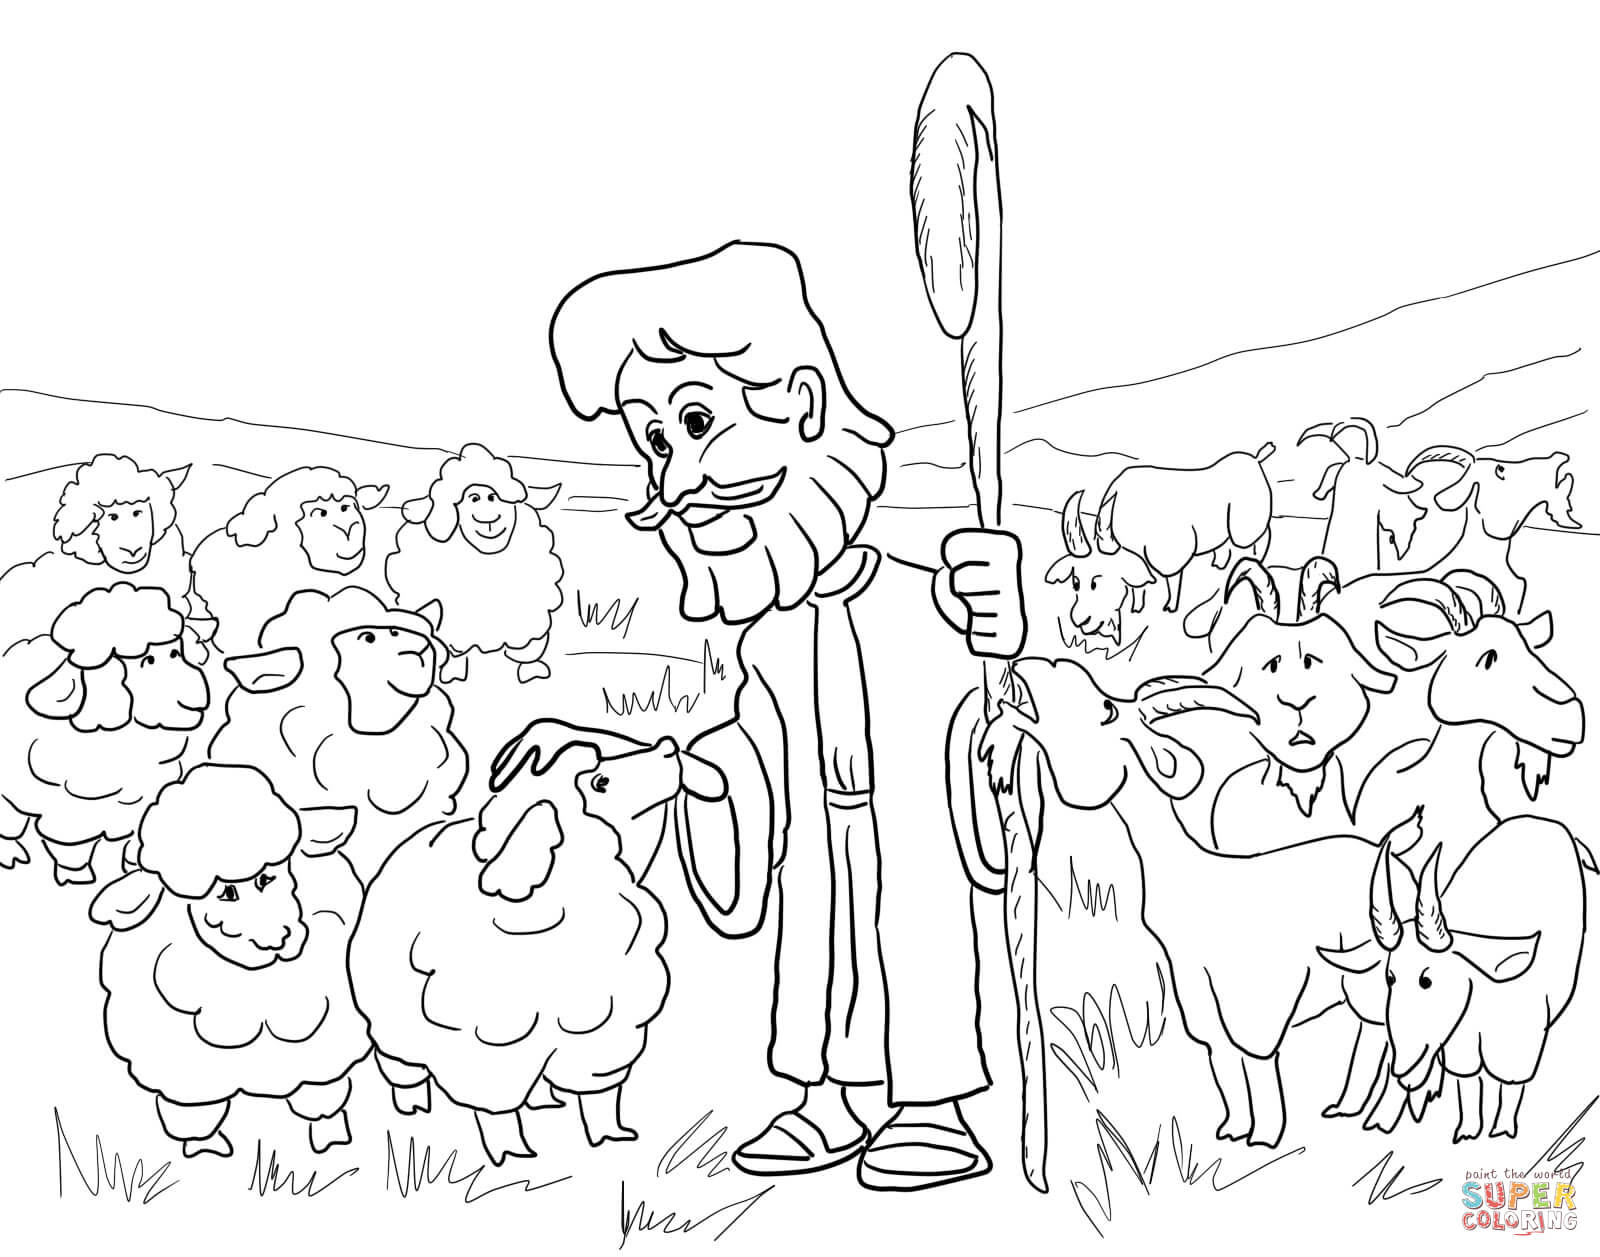 Parable of the sheep and the goats coloring page free printable coloring pages